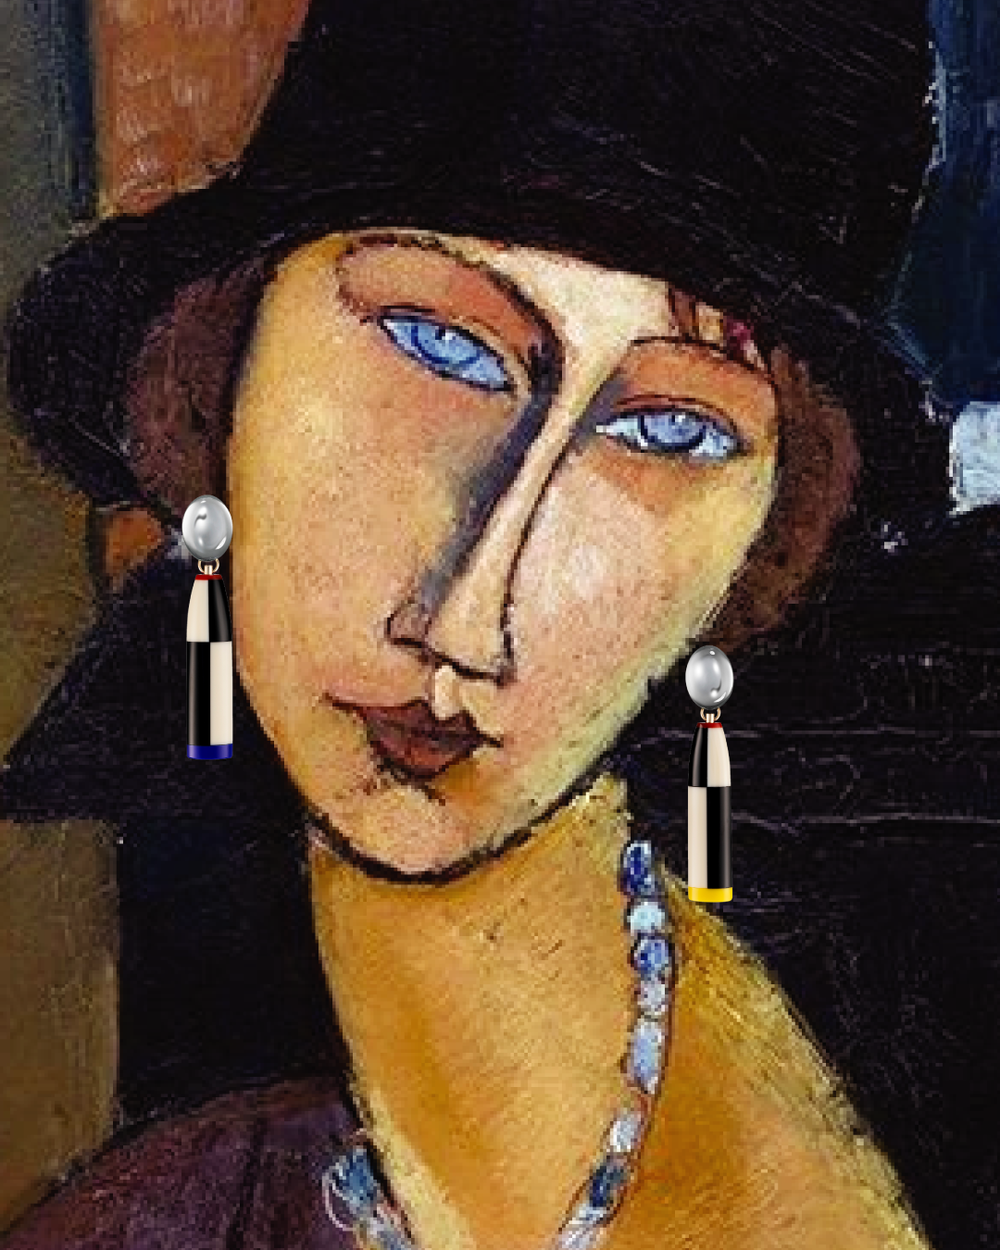 Art-time-travelling-with-Mondigliani-1917.png